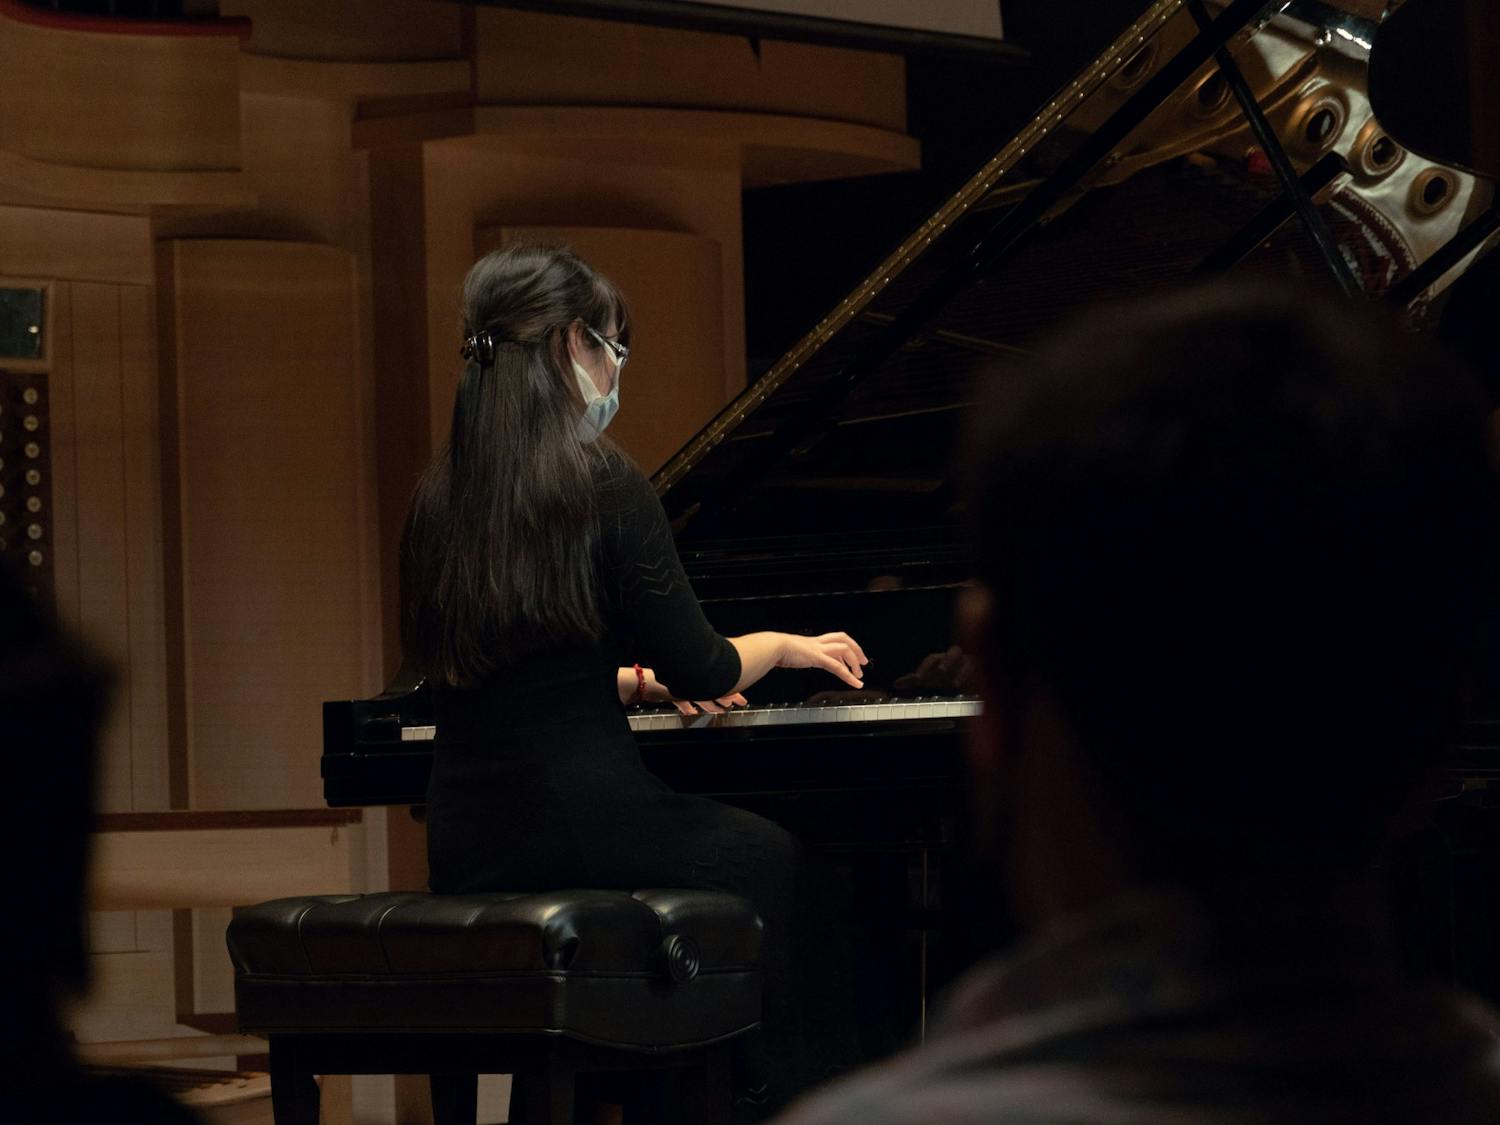 USC School of Music student performs a piano art song during the "Together: A celebration of Asian and Pacific Islander Communities" concert on March 15, 2022. &nbsp;The concert focused on the celebrating and showcasing works from Asian and Pacific Islander composers in recognition of the lives lost on March 16, 2021.